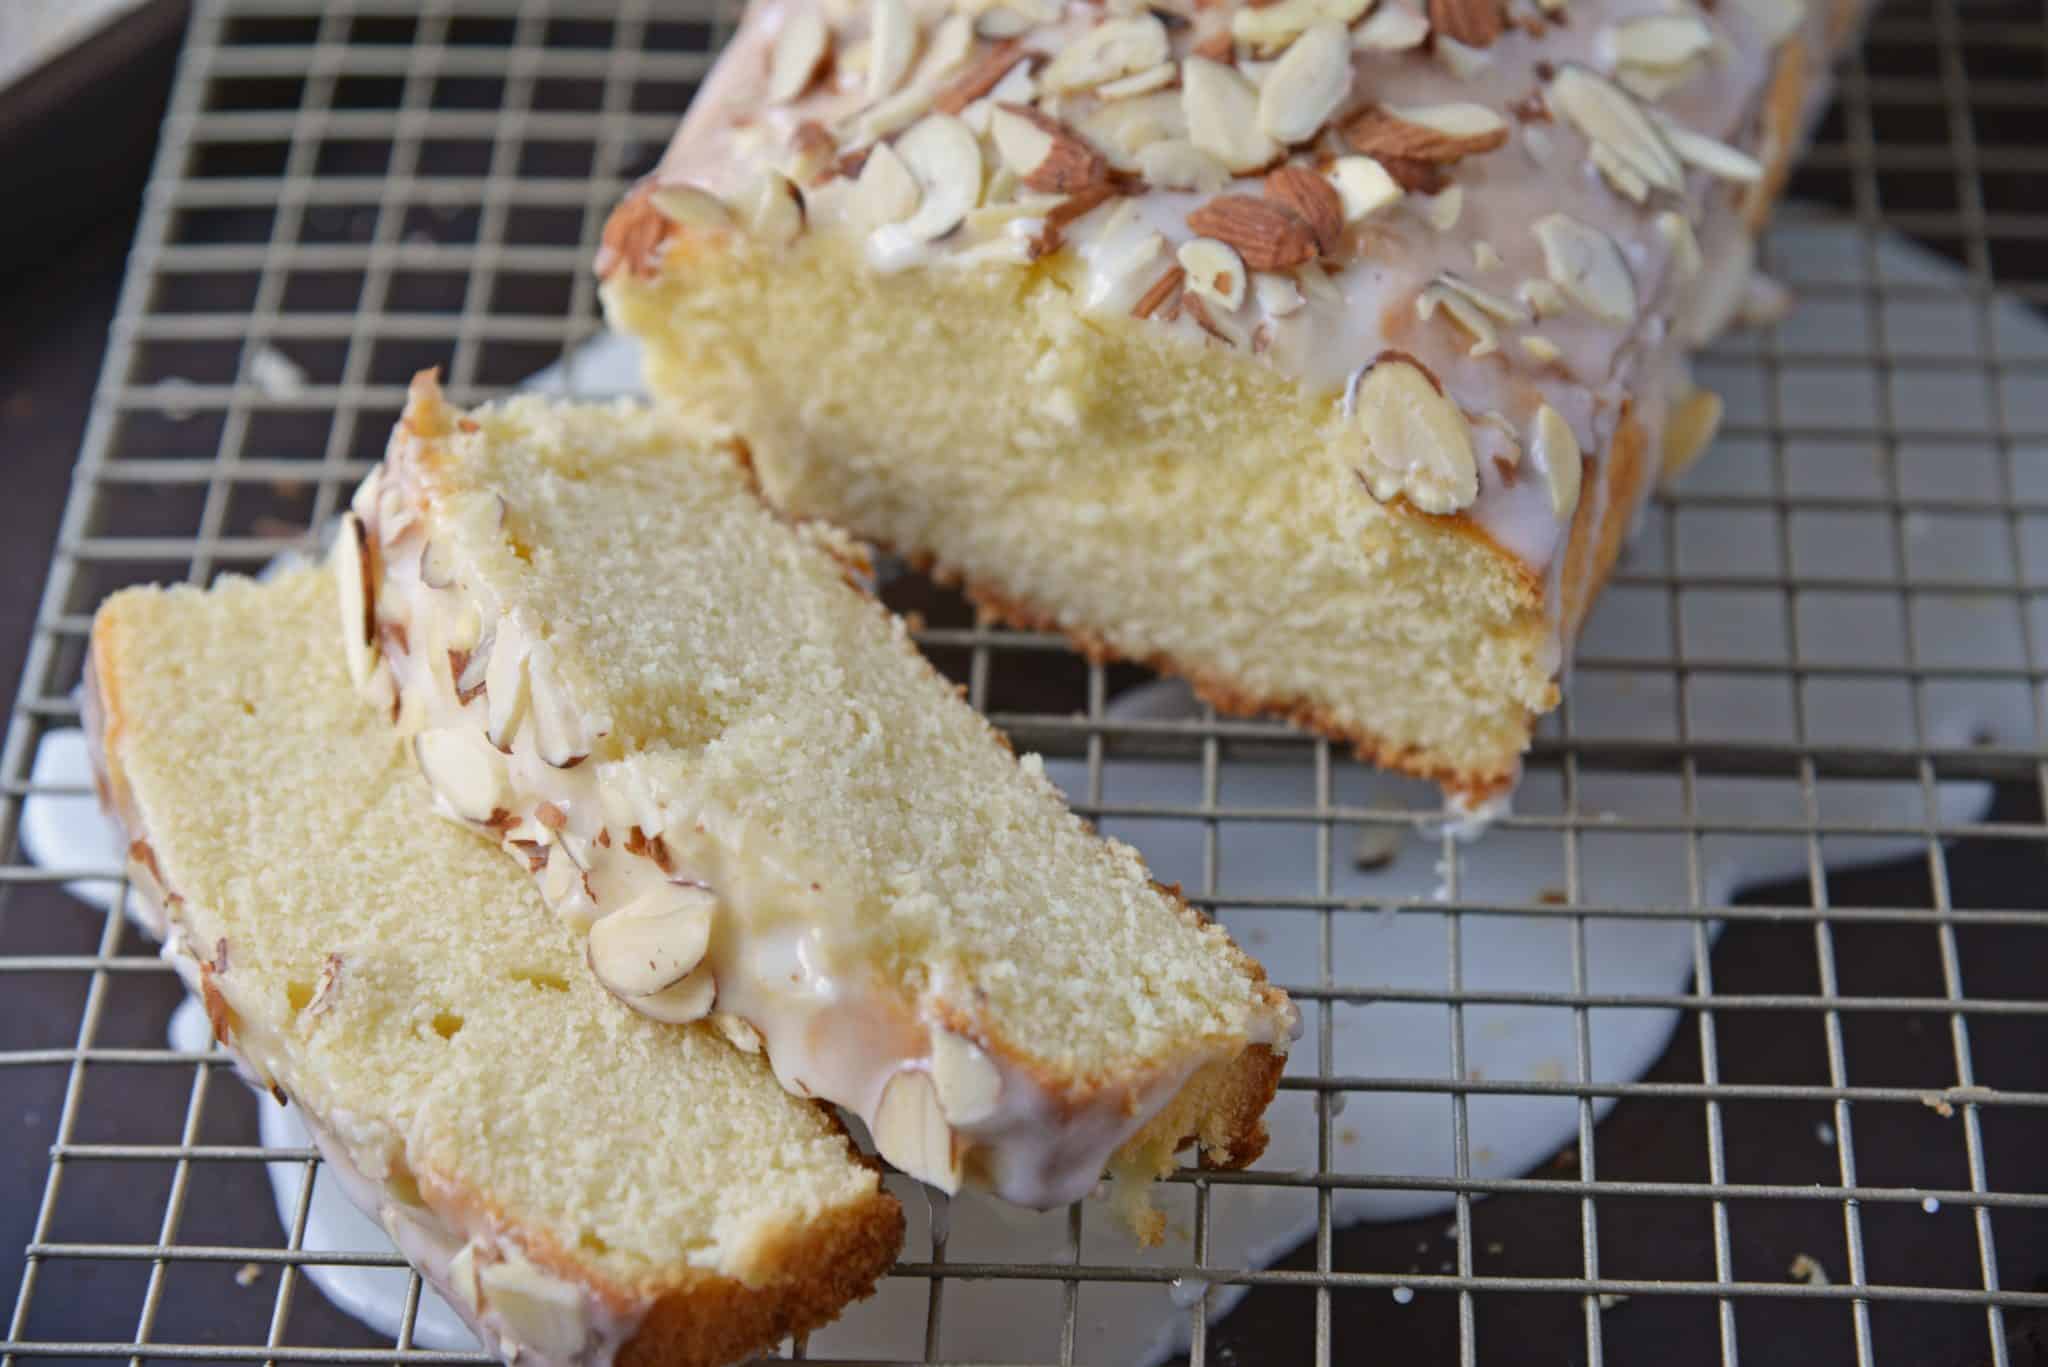 This Almond Pound Cake recipe is easy, moist and as dense as a pound cake should be. Topped with an almond pound cake glaze, it's the perfect dessert! #almondpoundcake #poundcakerecipe www.savoryexperiments.com